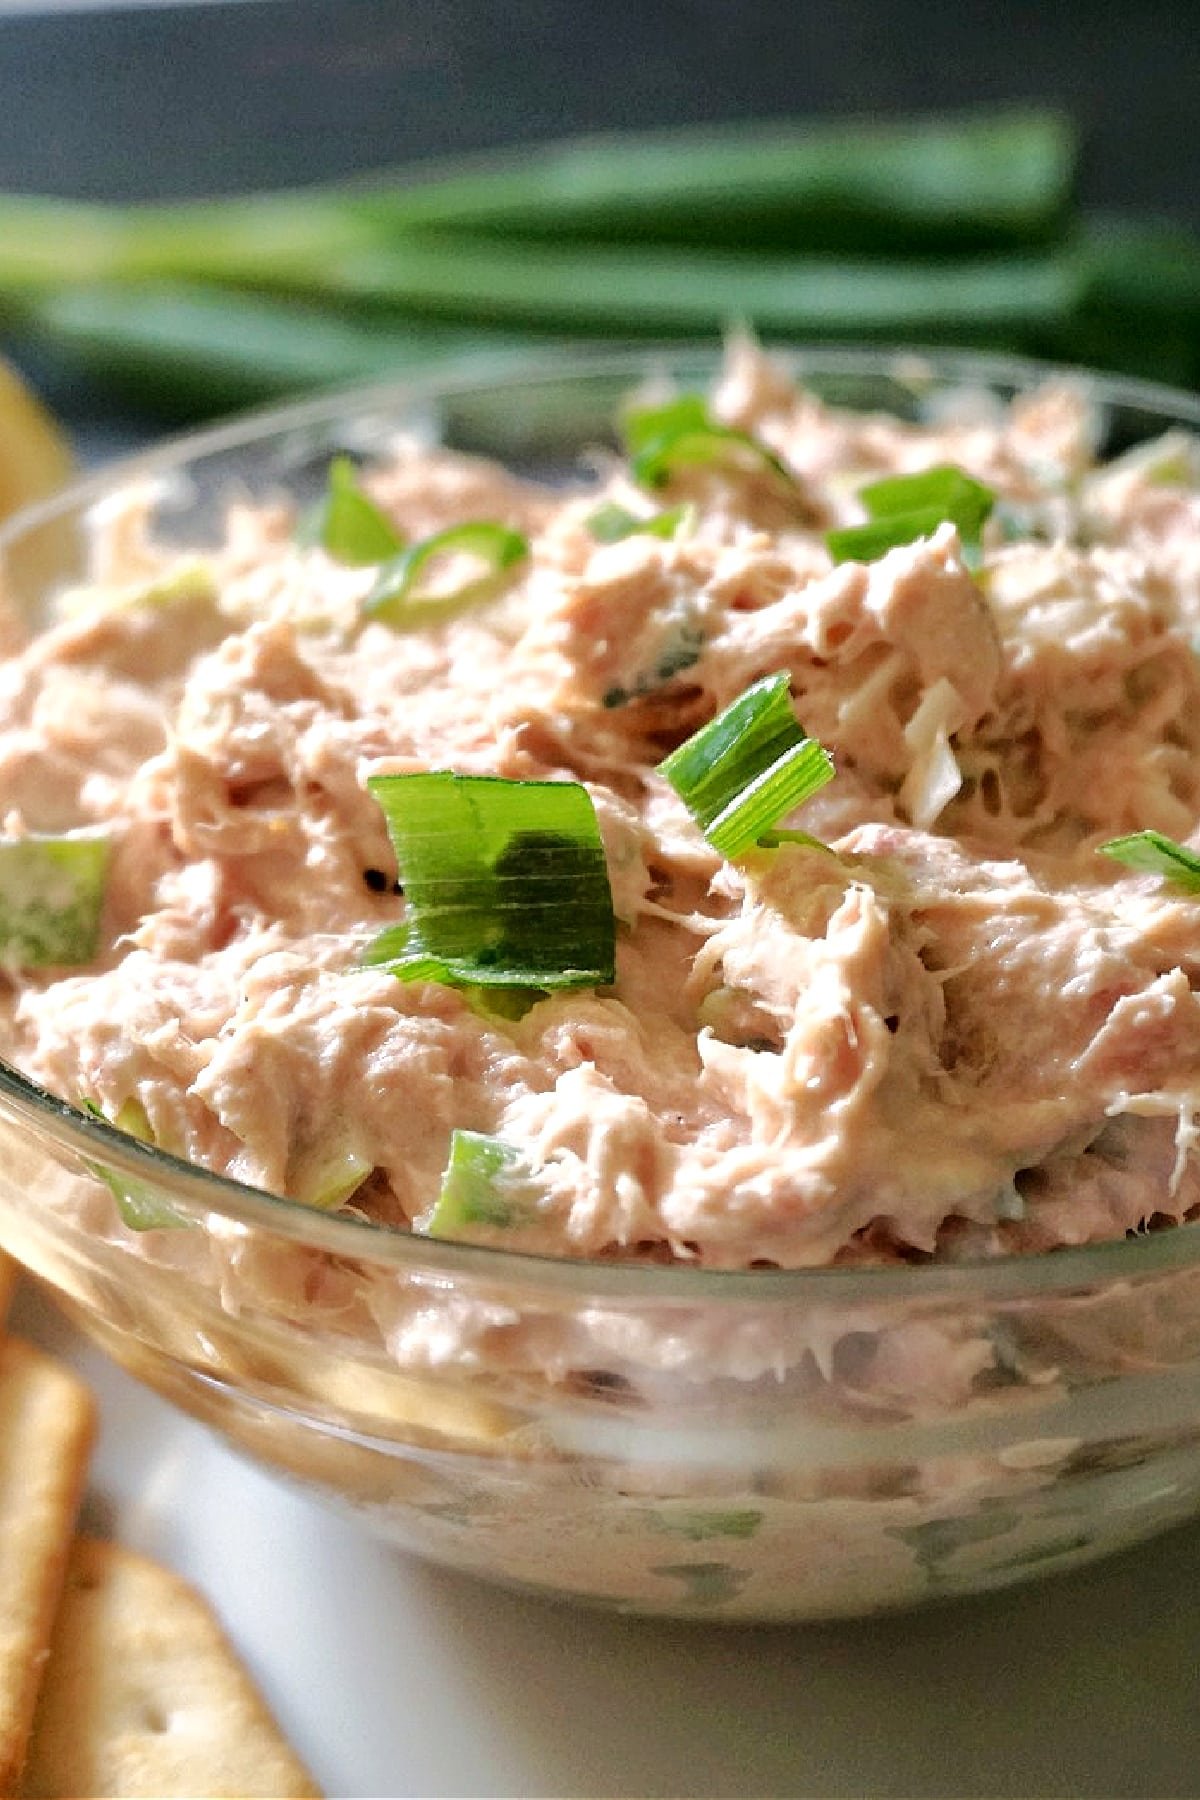 A bowl with tuna dip garnished with chopped green onions.